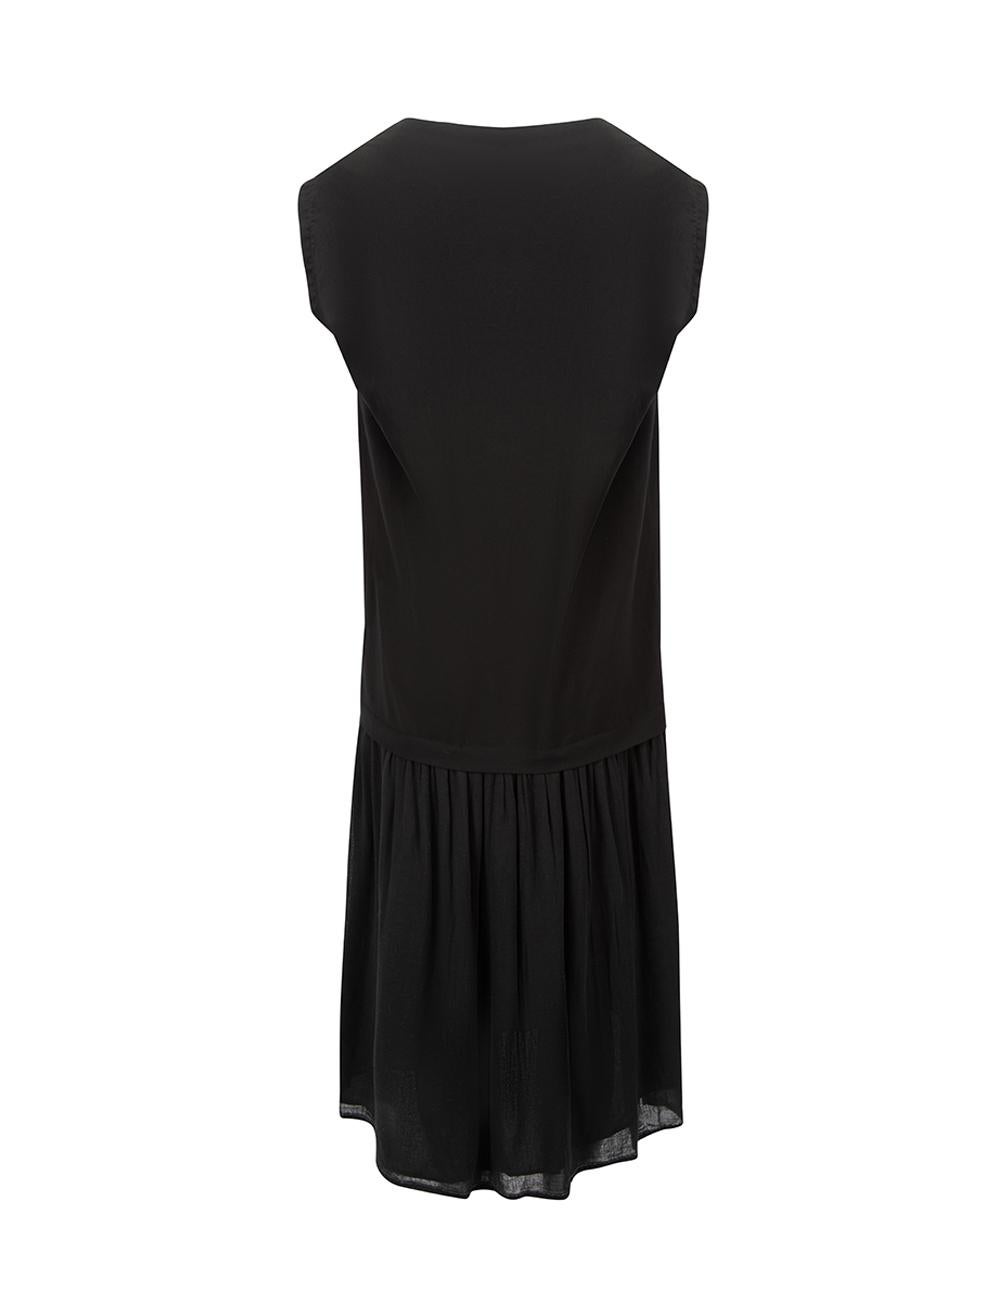 Y's Black Ruffle Skirt Midi Dress Size XS In Good Condition For Sale In London, GB